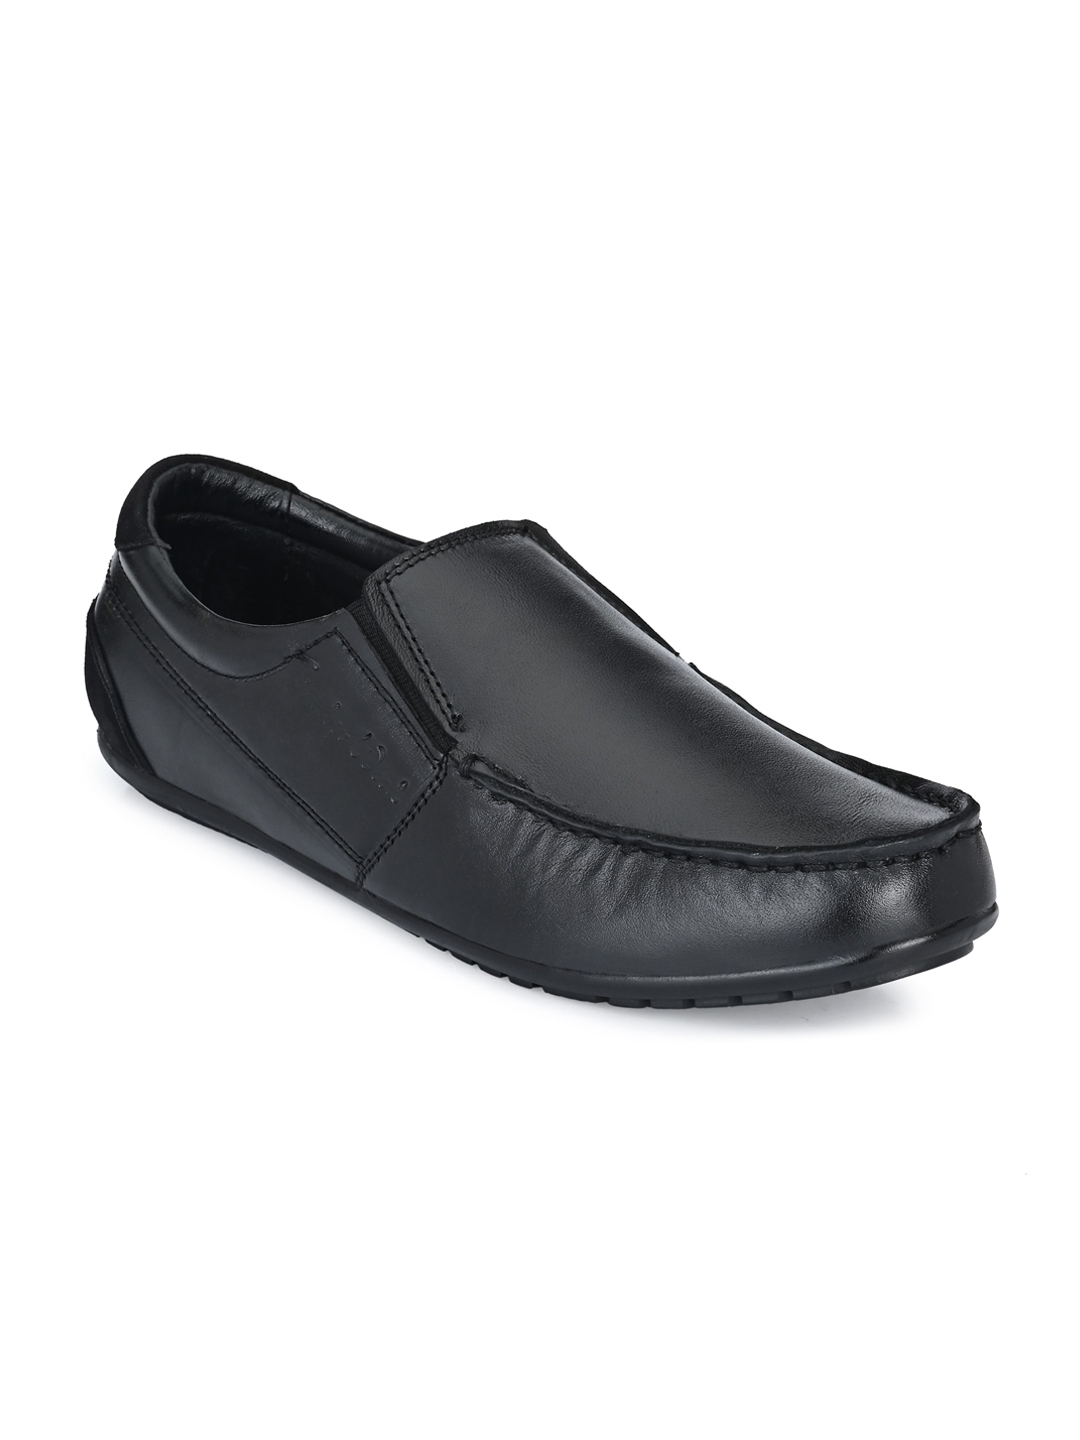 Buy TimberWood Men Black Leather Loafers - Casual Shoes for Men